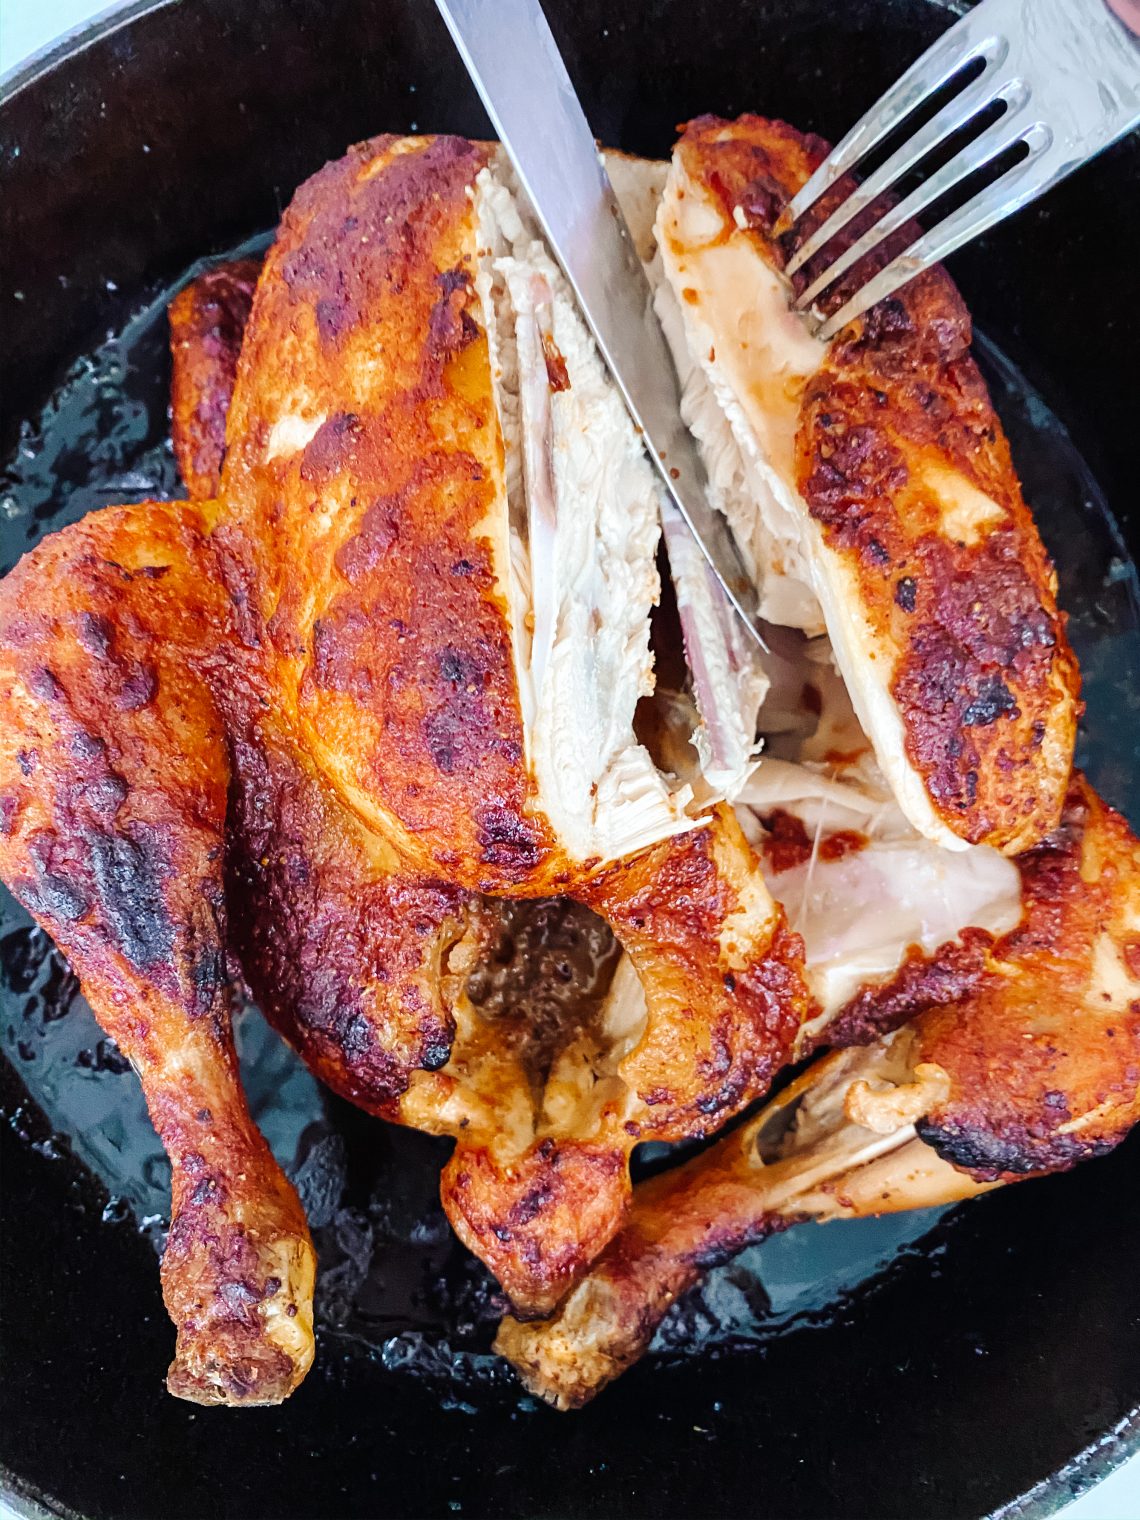 Photograph of Rotisserie Skillet Roast Chicken with Mashed Potatoes and Onion Gravy